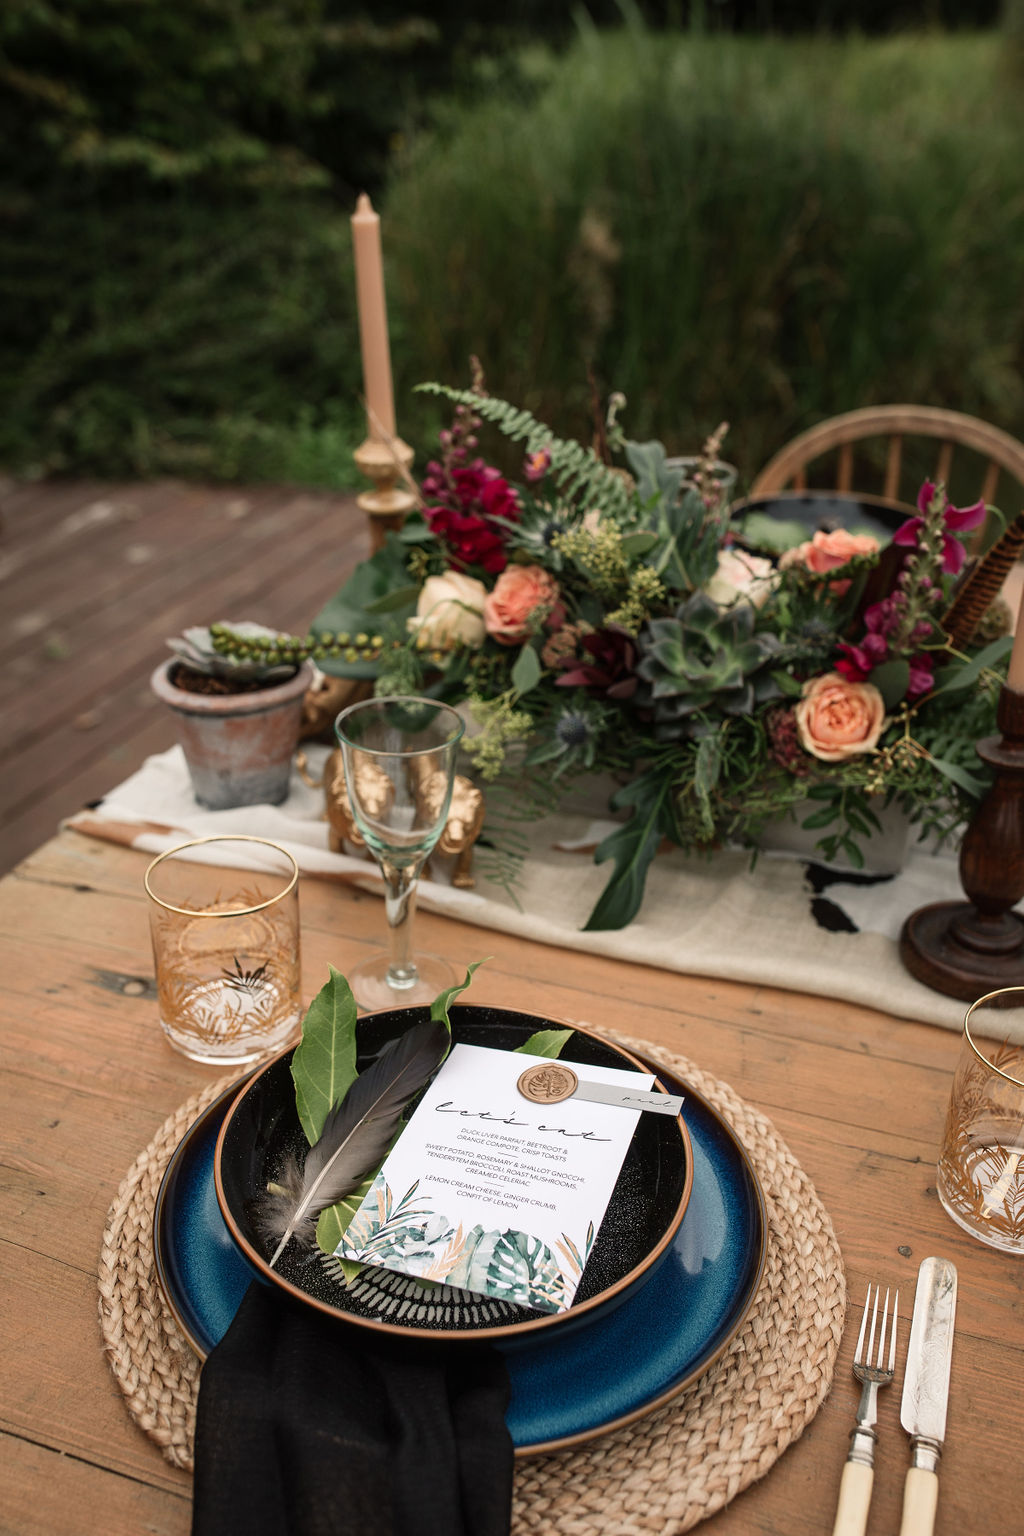 sustainable horsley hale wedding inspiration with Four Counties Awards, image credit Becky Harley Photography